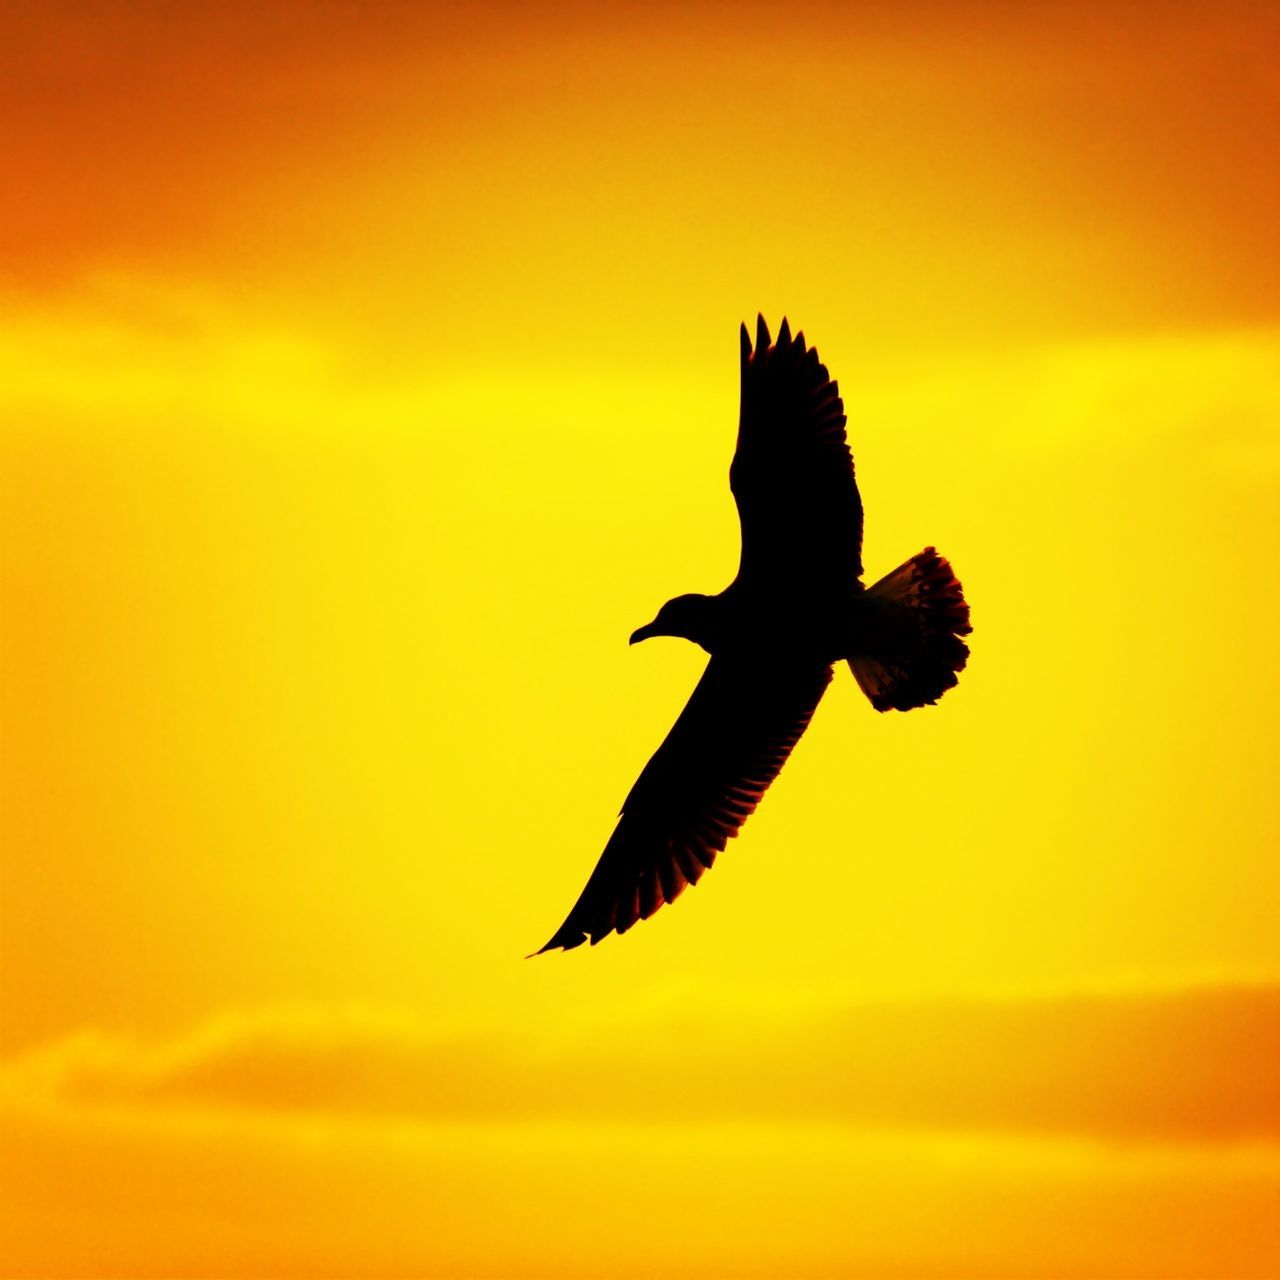 flying, animal themes, bird, spread wings, animals in the wild, one animal, mid-air, wildlife, sunset, low angle view, silhouette, orange color, sky, nature, motion, beauty in nature, full length, freedom, outdoors, no people